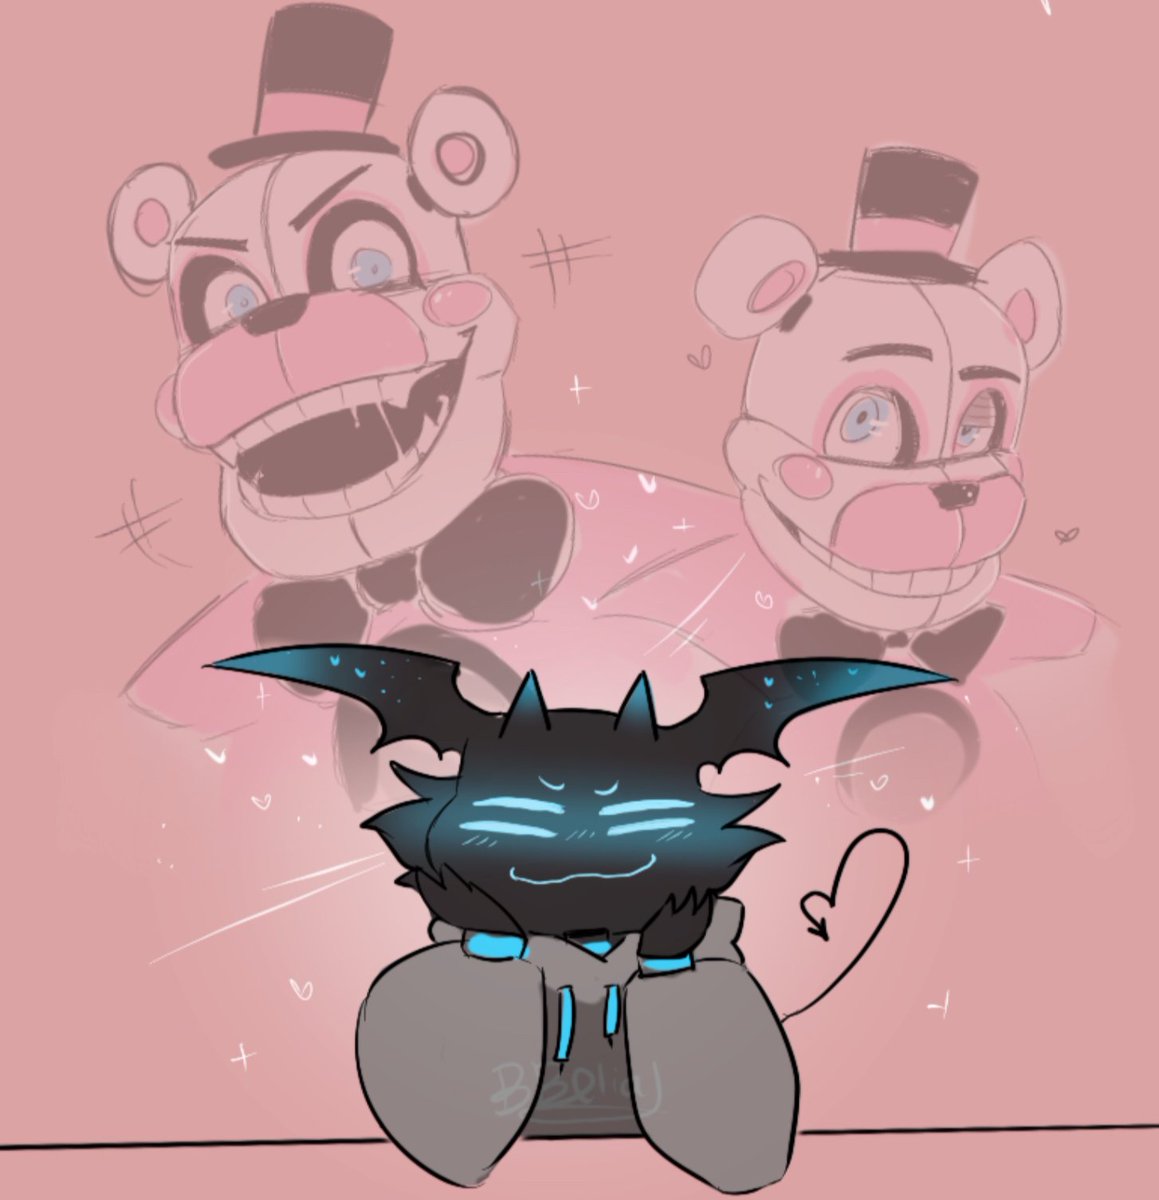 [Ride by Sir Mix-A-Lot playing bass boosted in the distance] 
#funtimefreddy